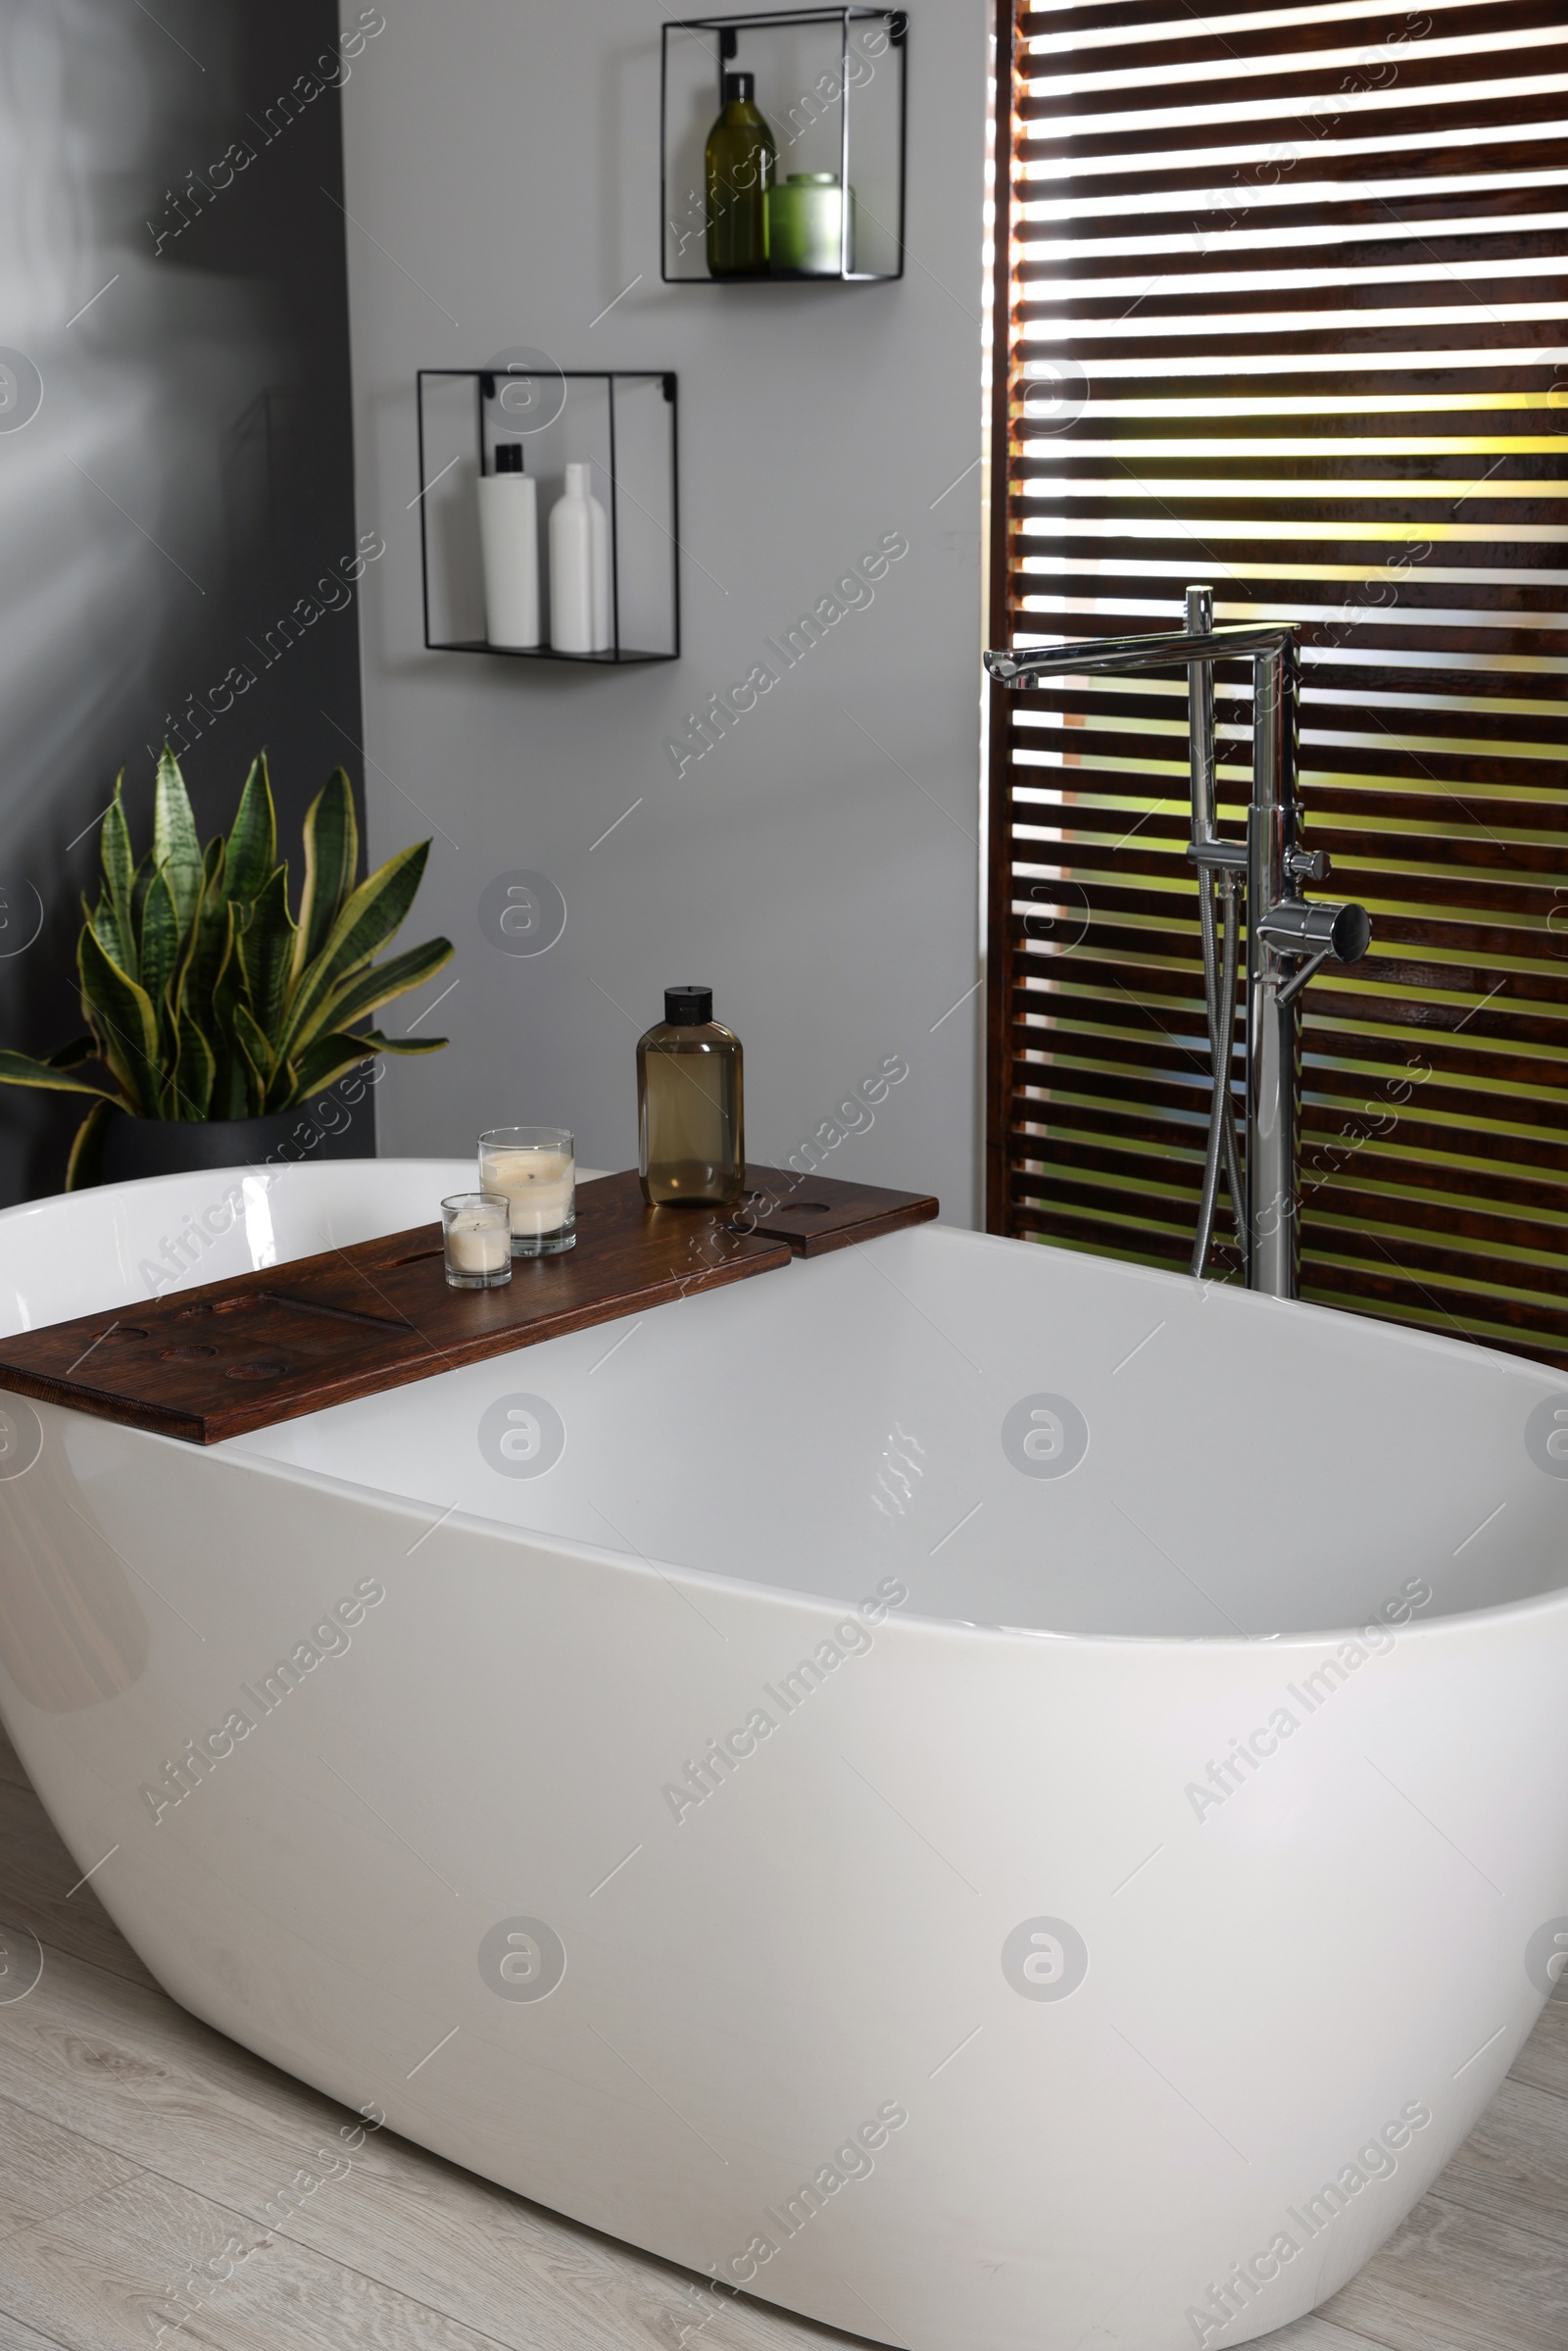 Photo of Stylish bathroom interior with ceramic tub, candles and care products on wooden bath tray